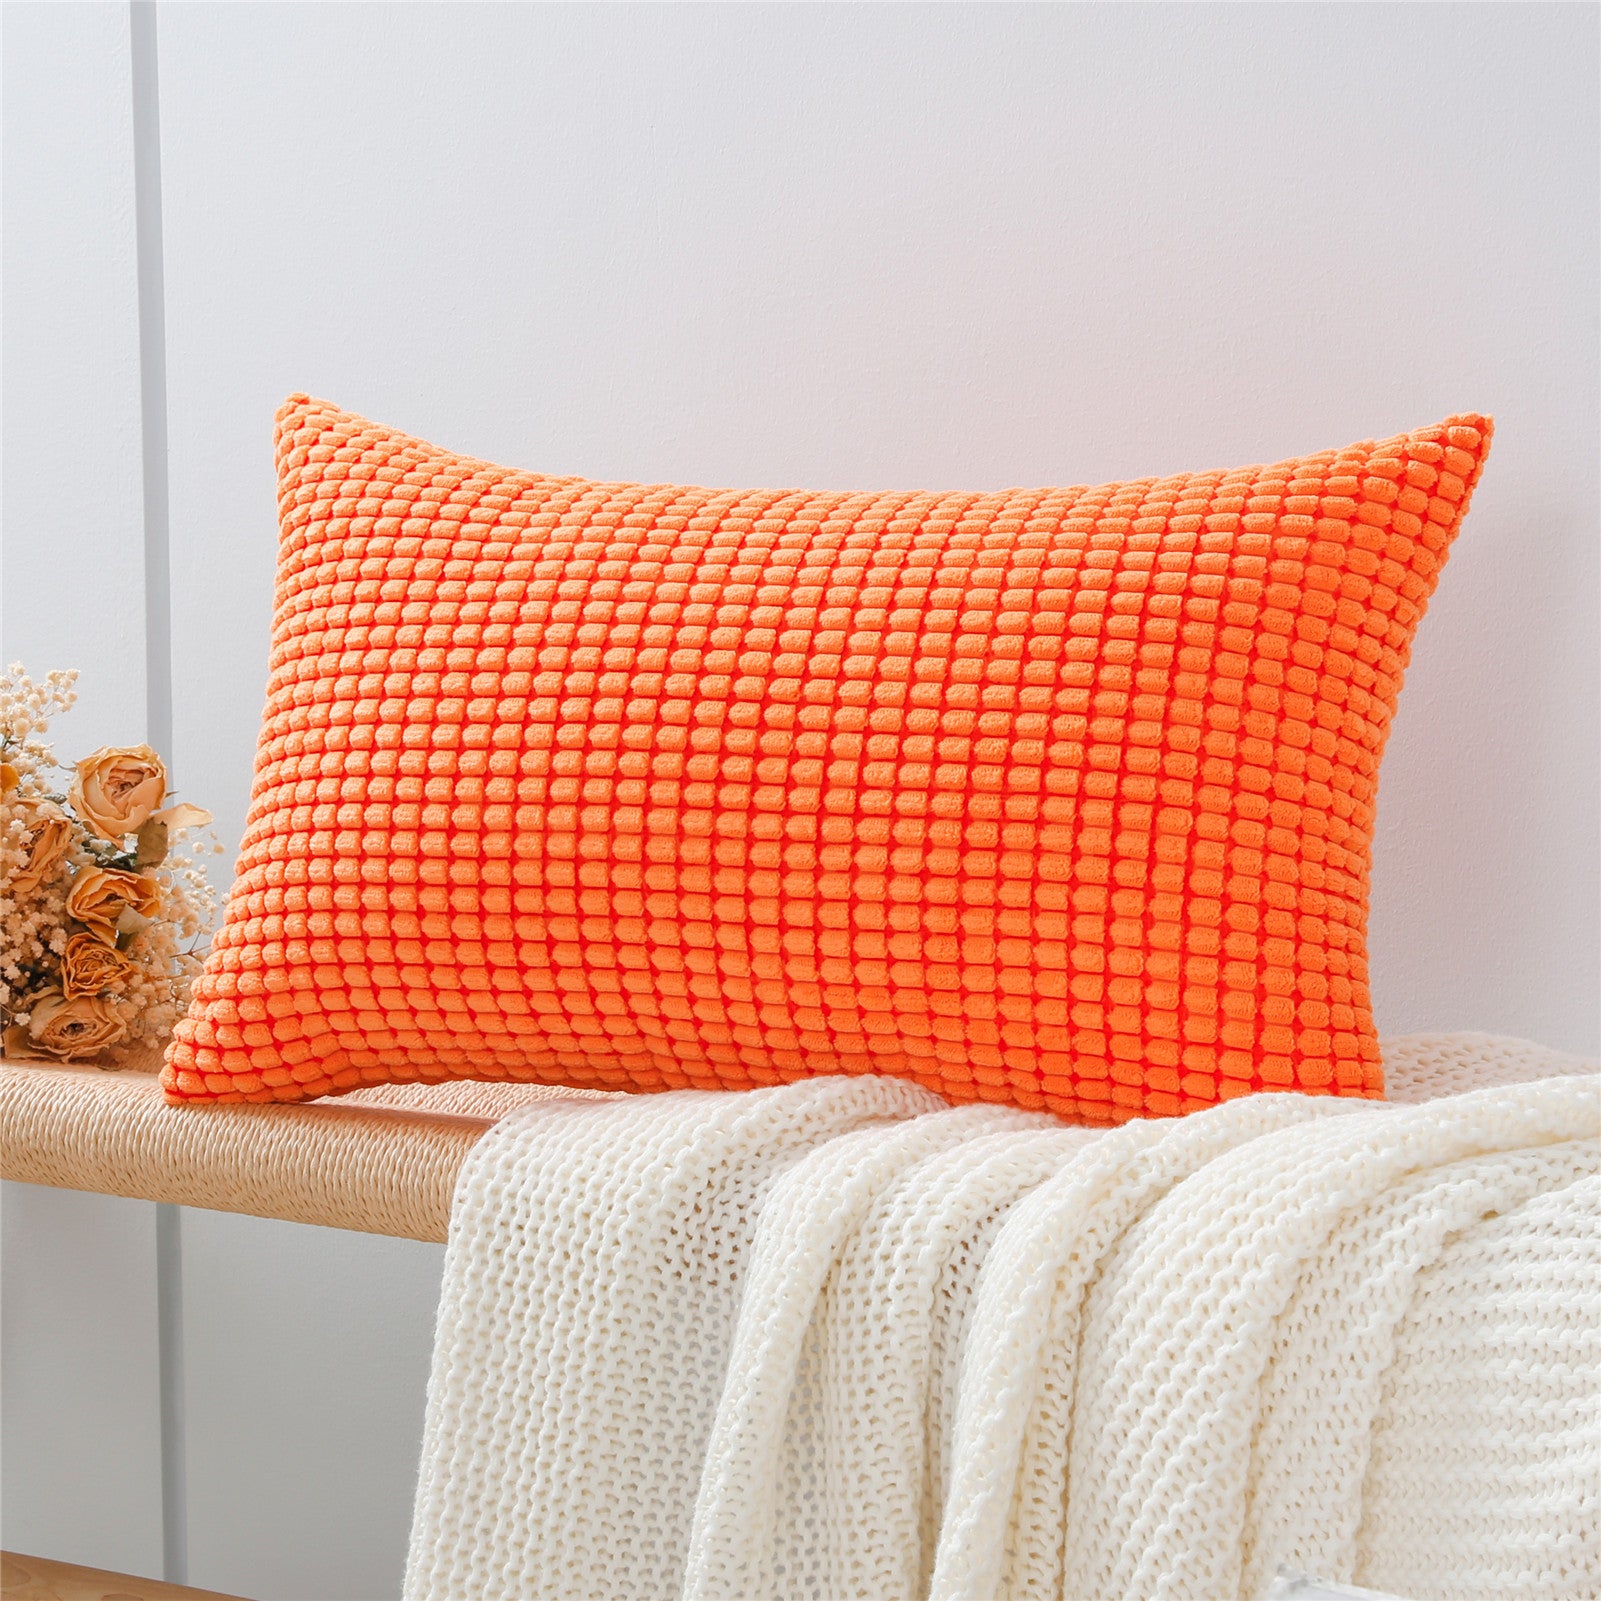 Corduroy Solid Color Decorative Pillow Cover with Regular Grains for Sofa Living Room